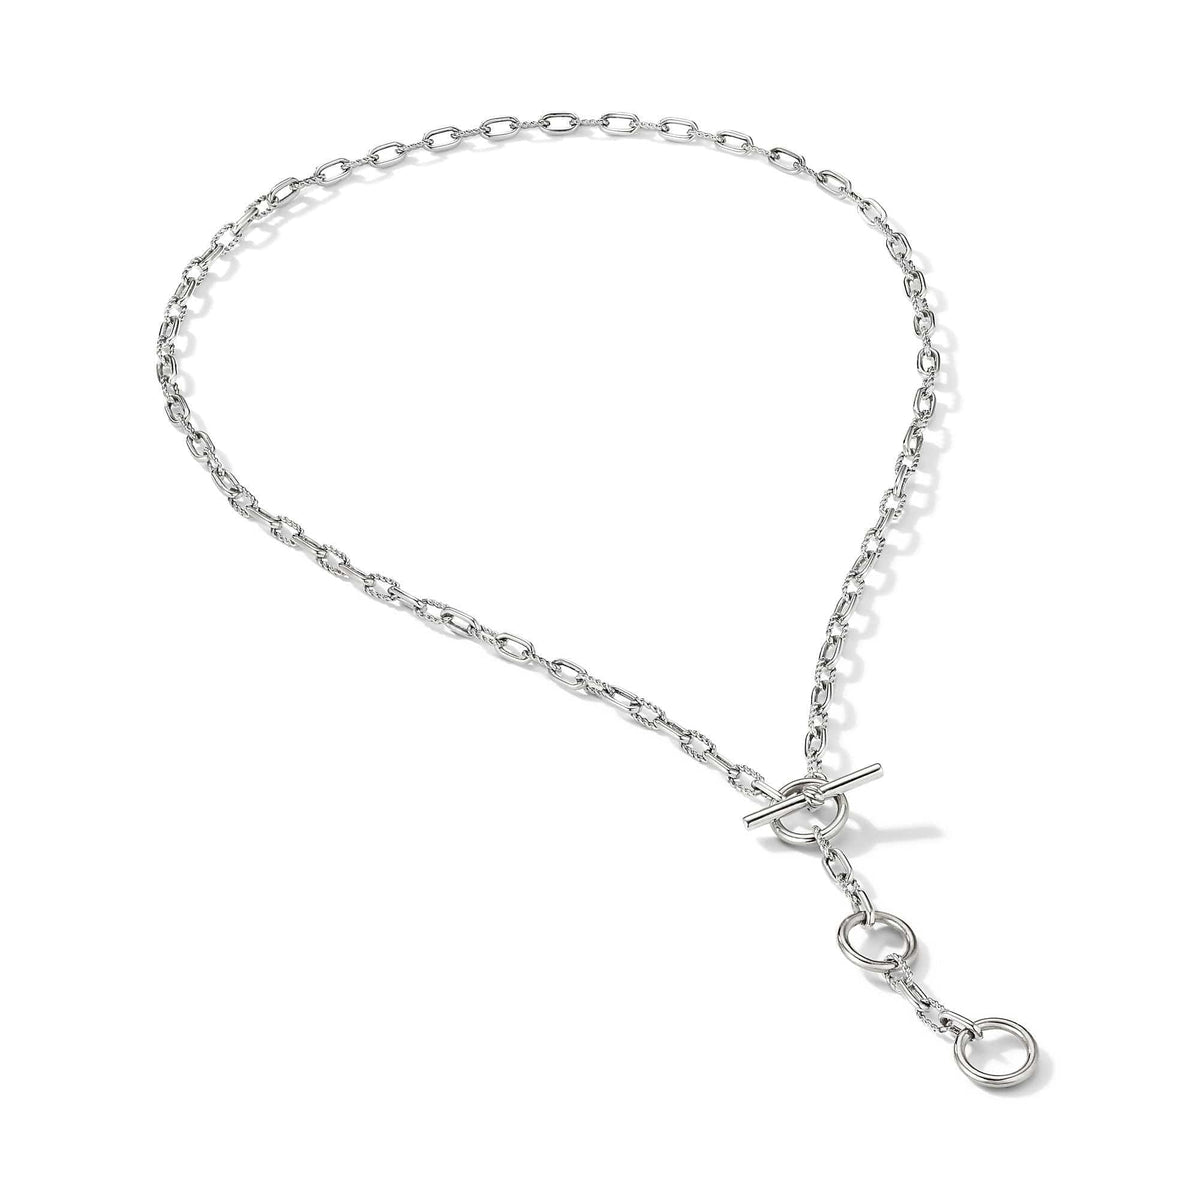 DY Madison® Three Ring Chain Necklace